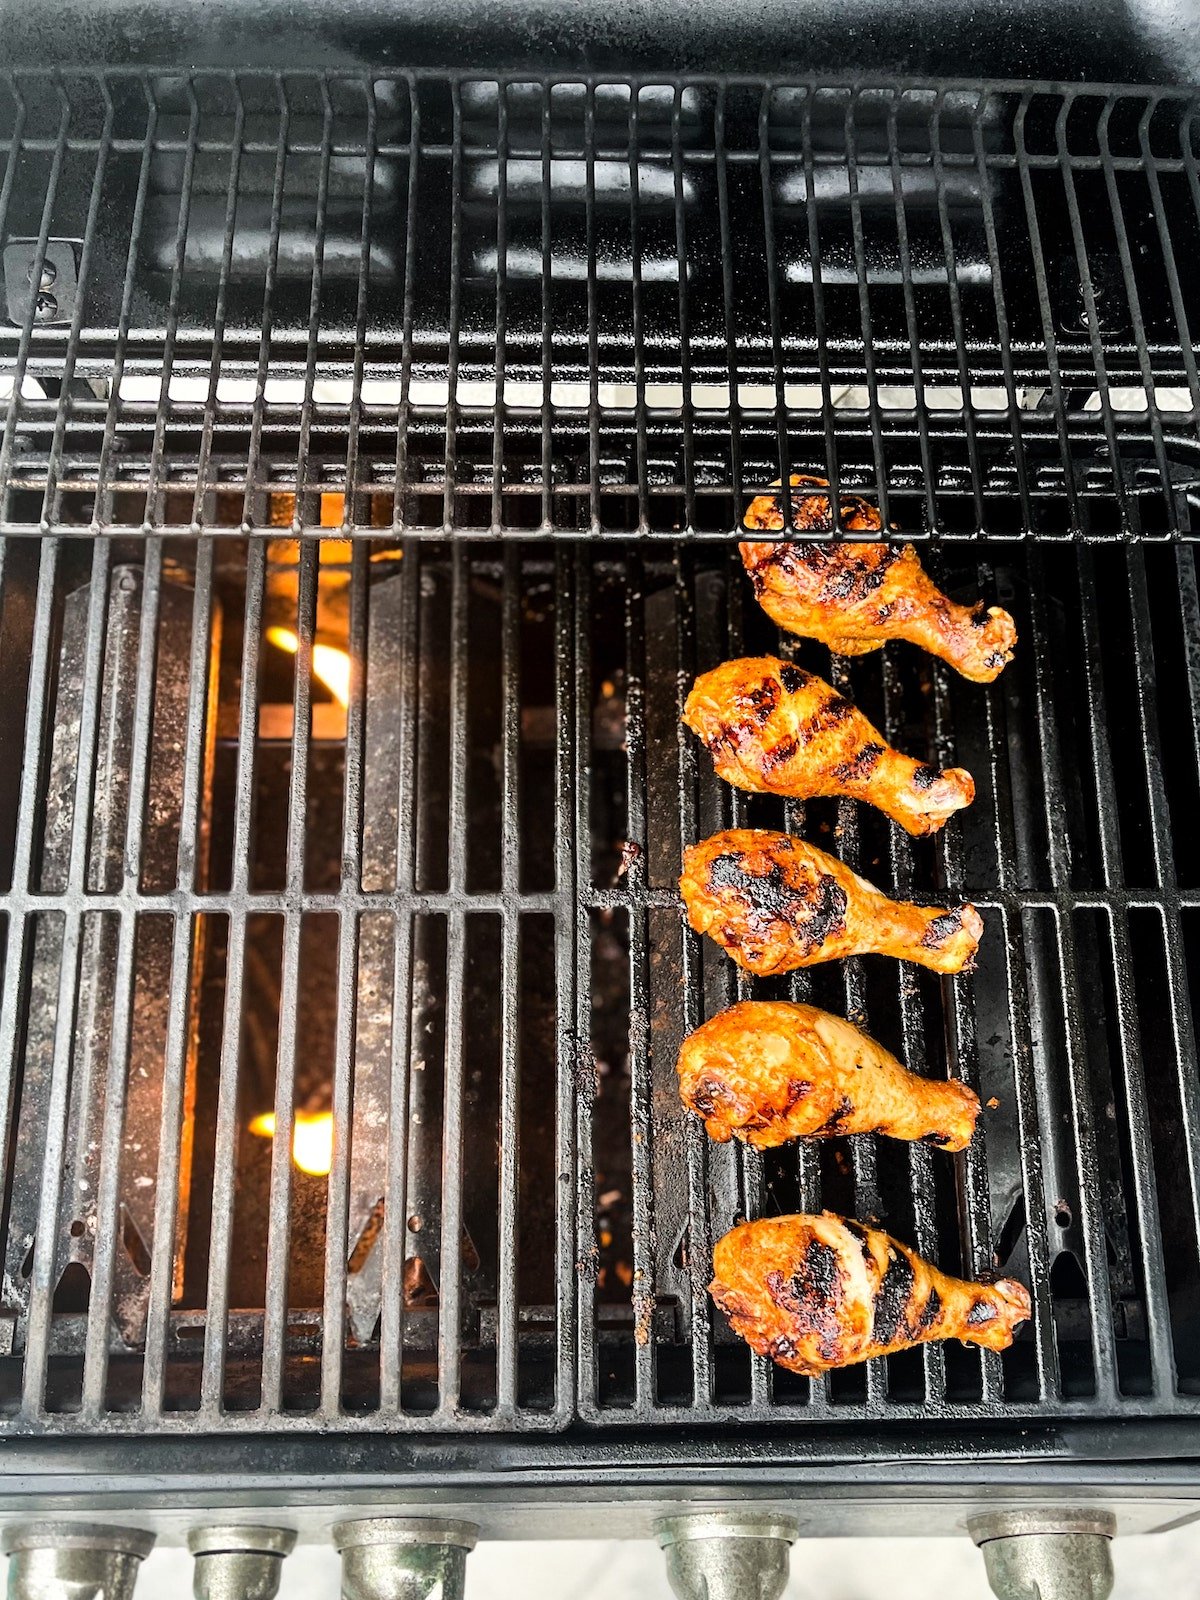 Drumsticks are being grilled on the side of the grill with the burners off.